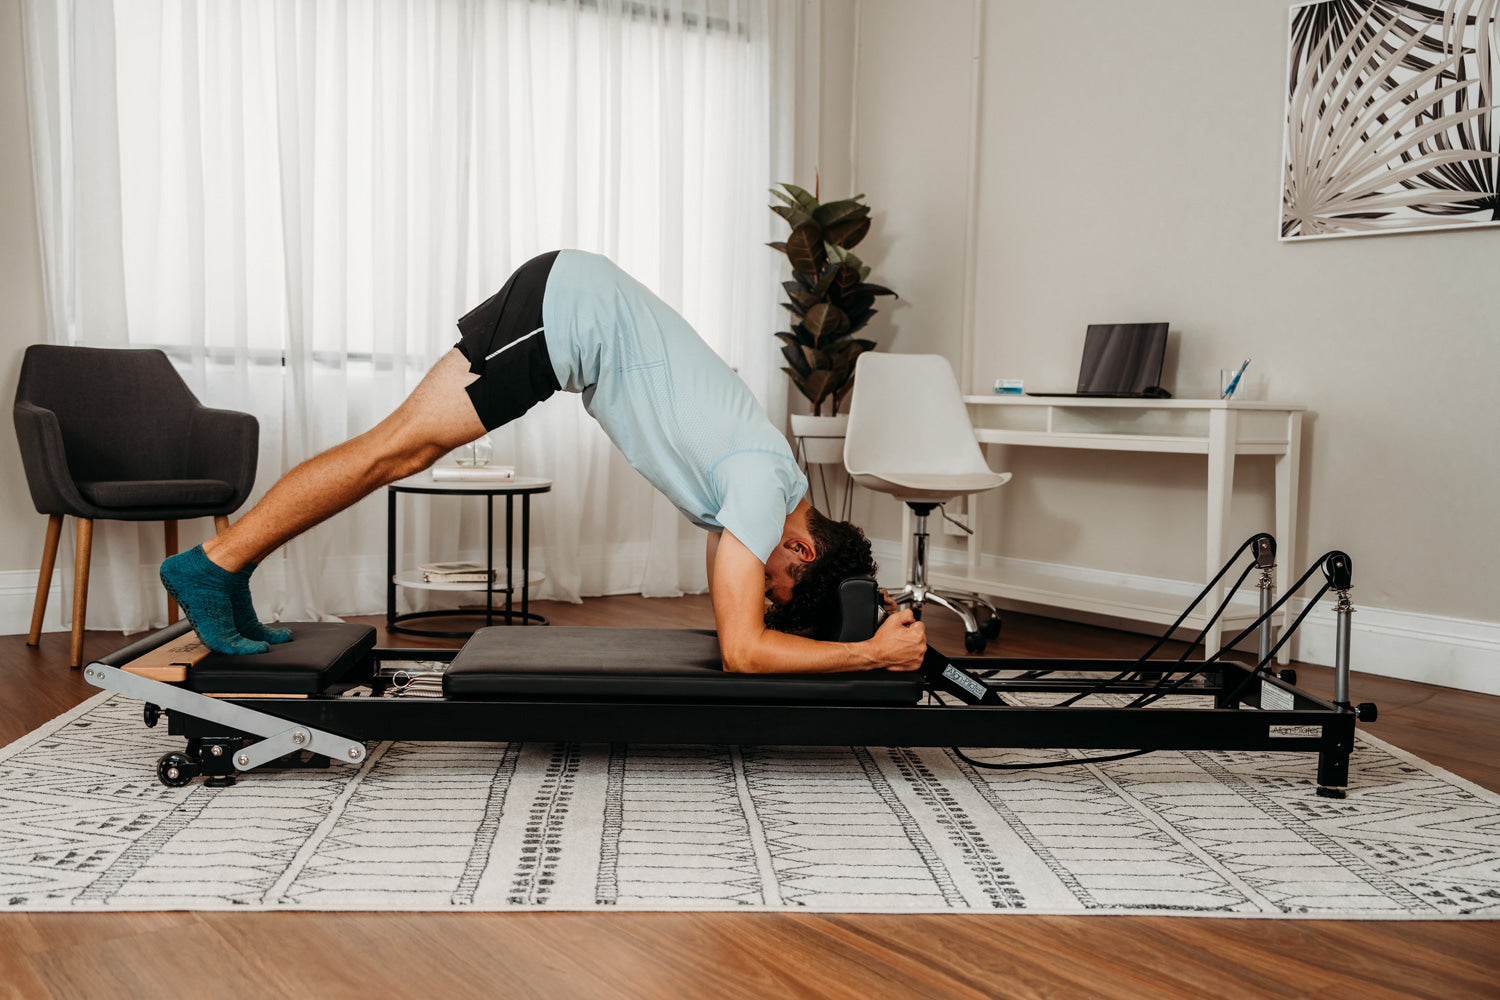 5 Benefits Of Using A Pilates Home Reformer For Your Fitness